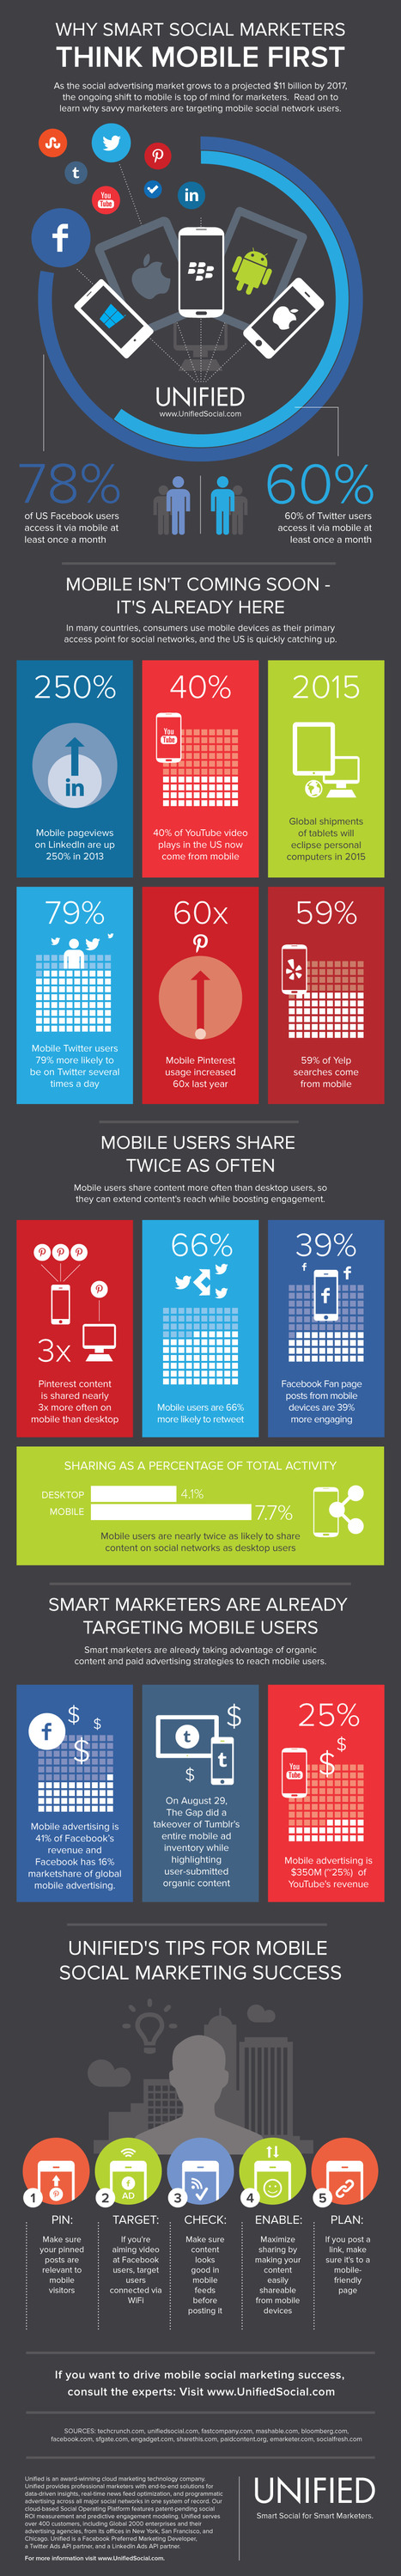 Why Smart Social Marketers Think Mobile First | Must Market | Scoop.it